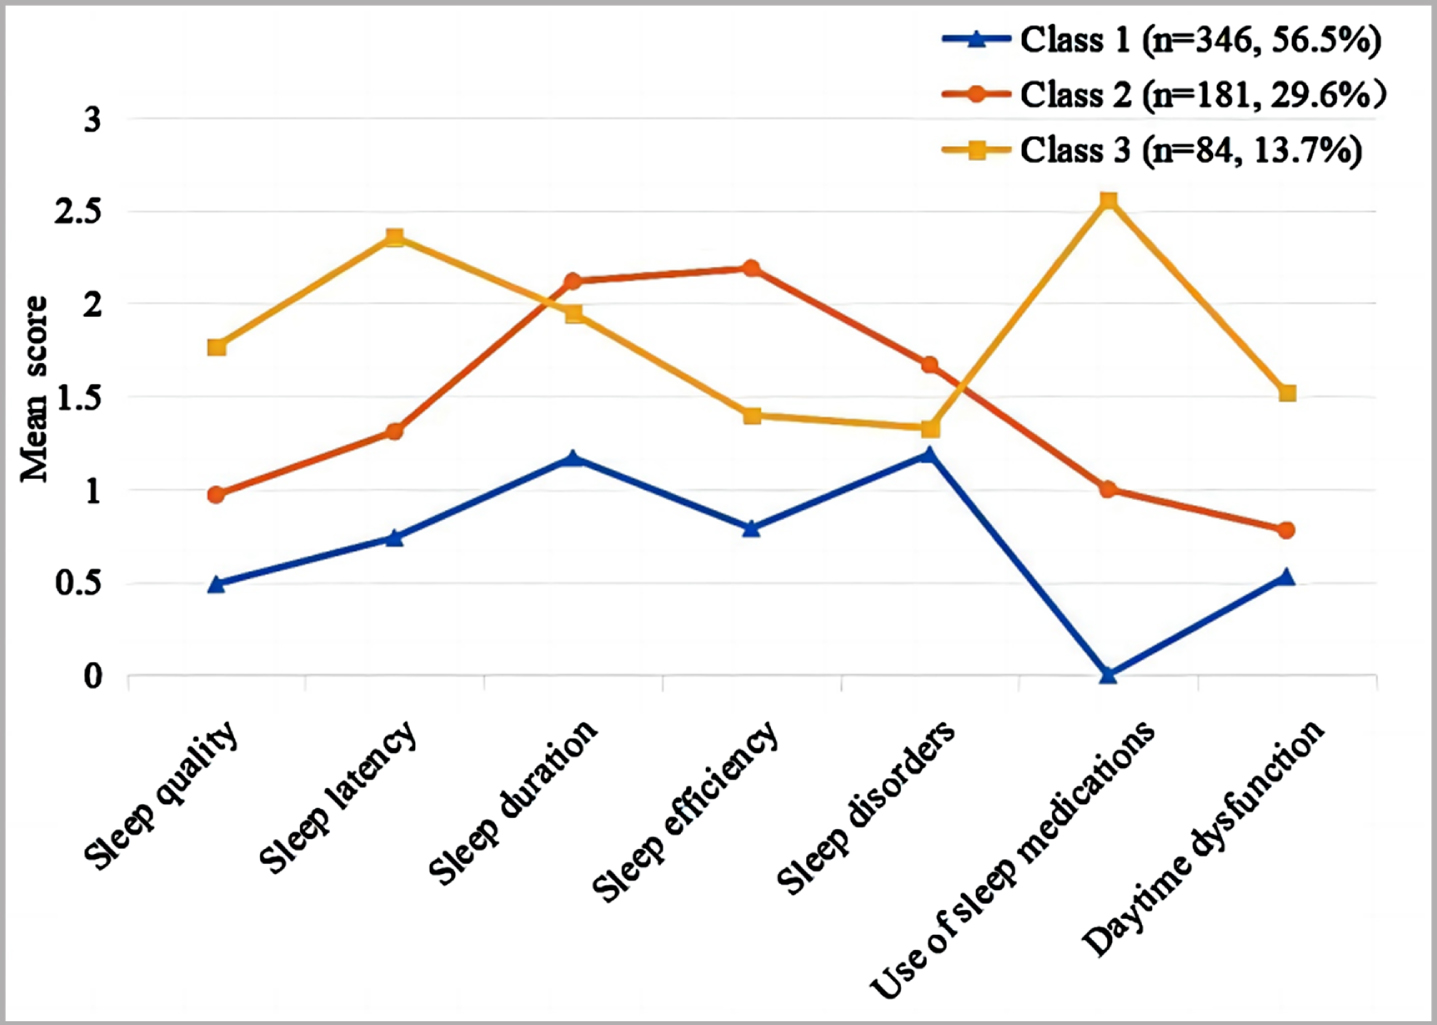 Characteristics of each potential sleep typing in patients with MCI. Class 1, Good sleep type; Class 2, Insufficient sleep type; Class 3, Difficulty falling asleep type.